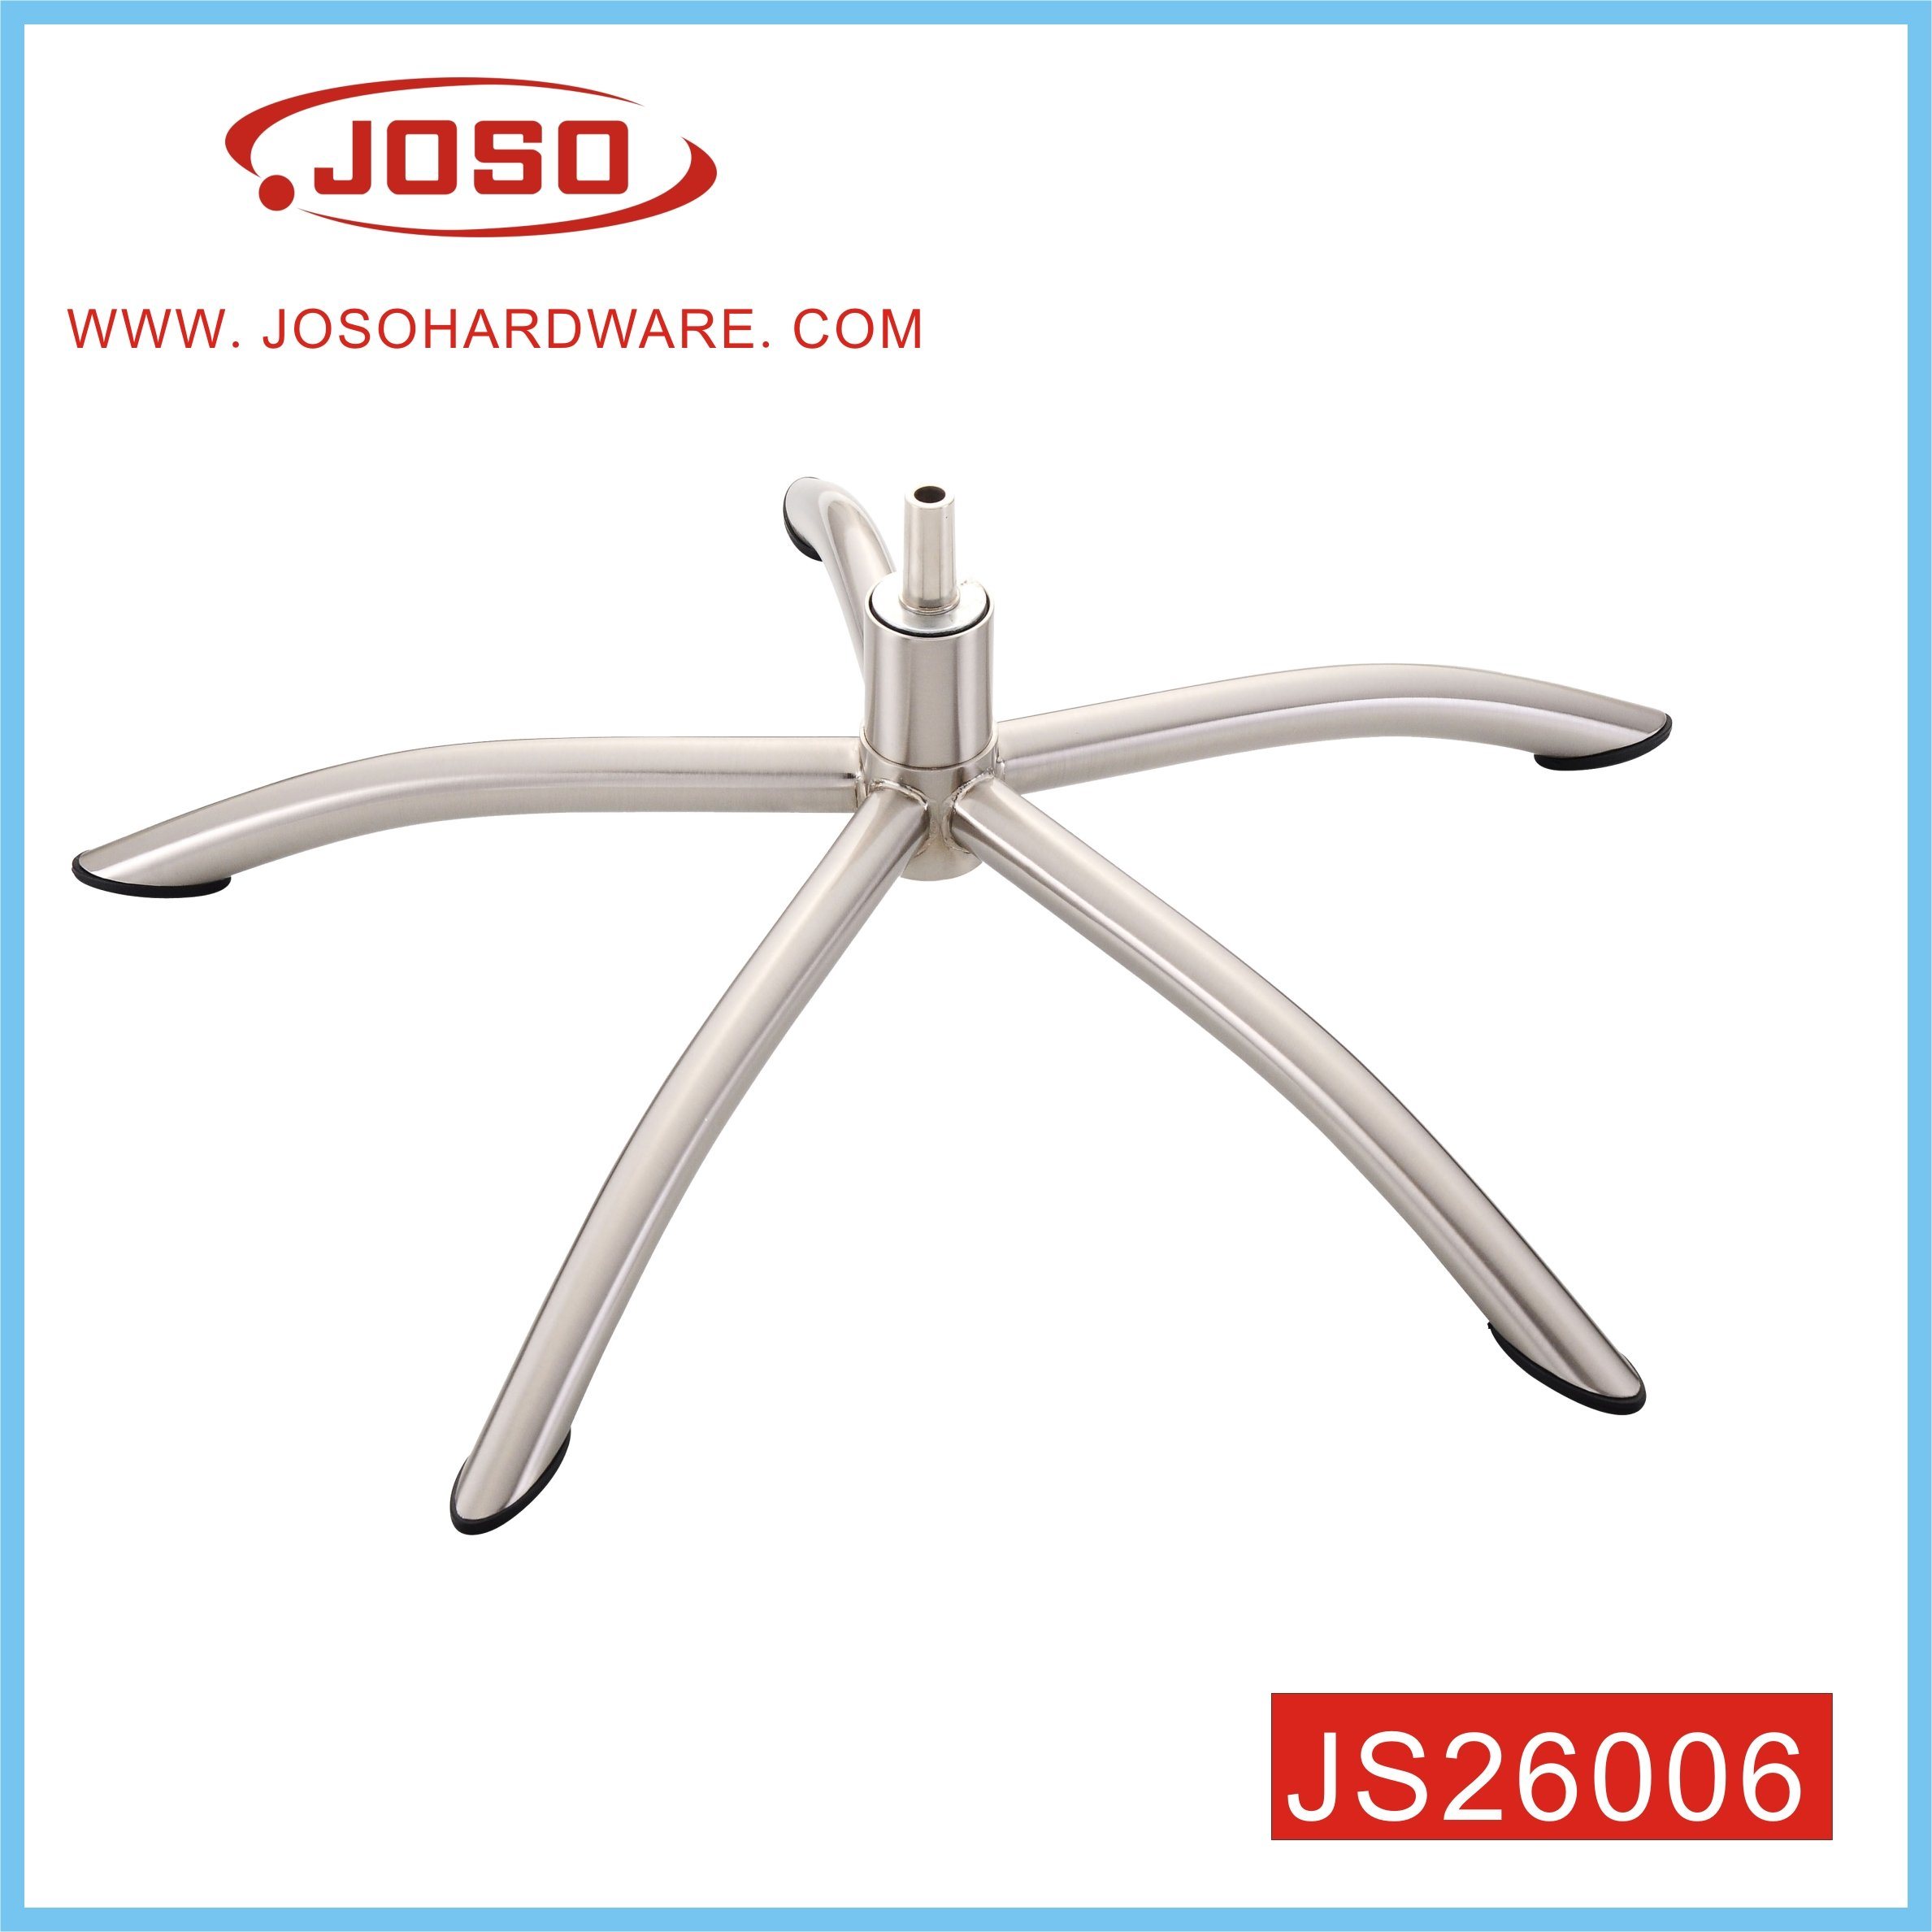 Dia Casting Producer Manufacture of Custom Chair Base